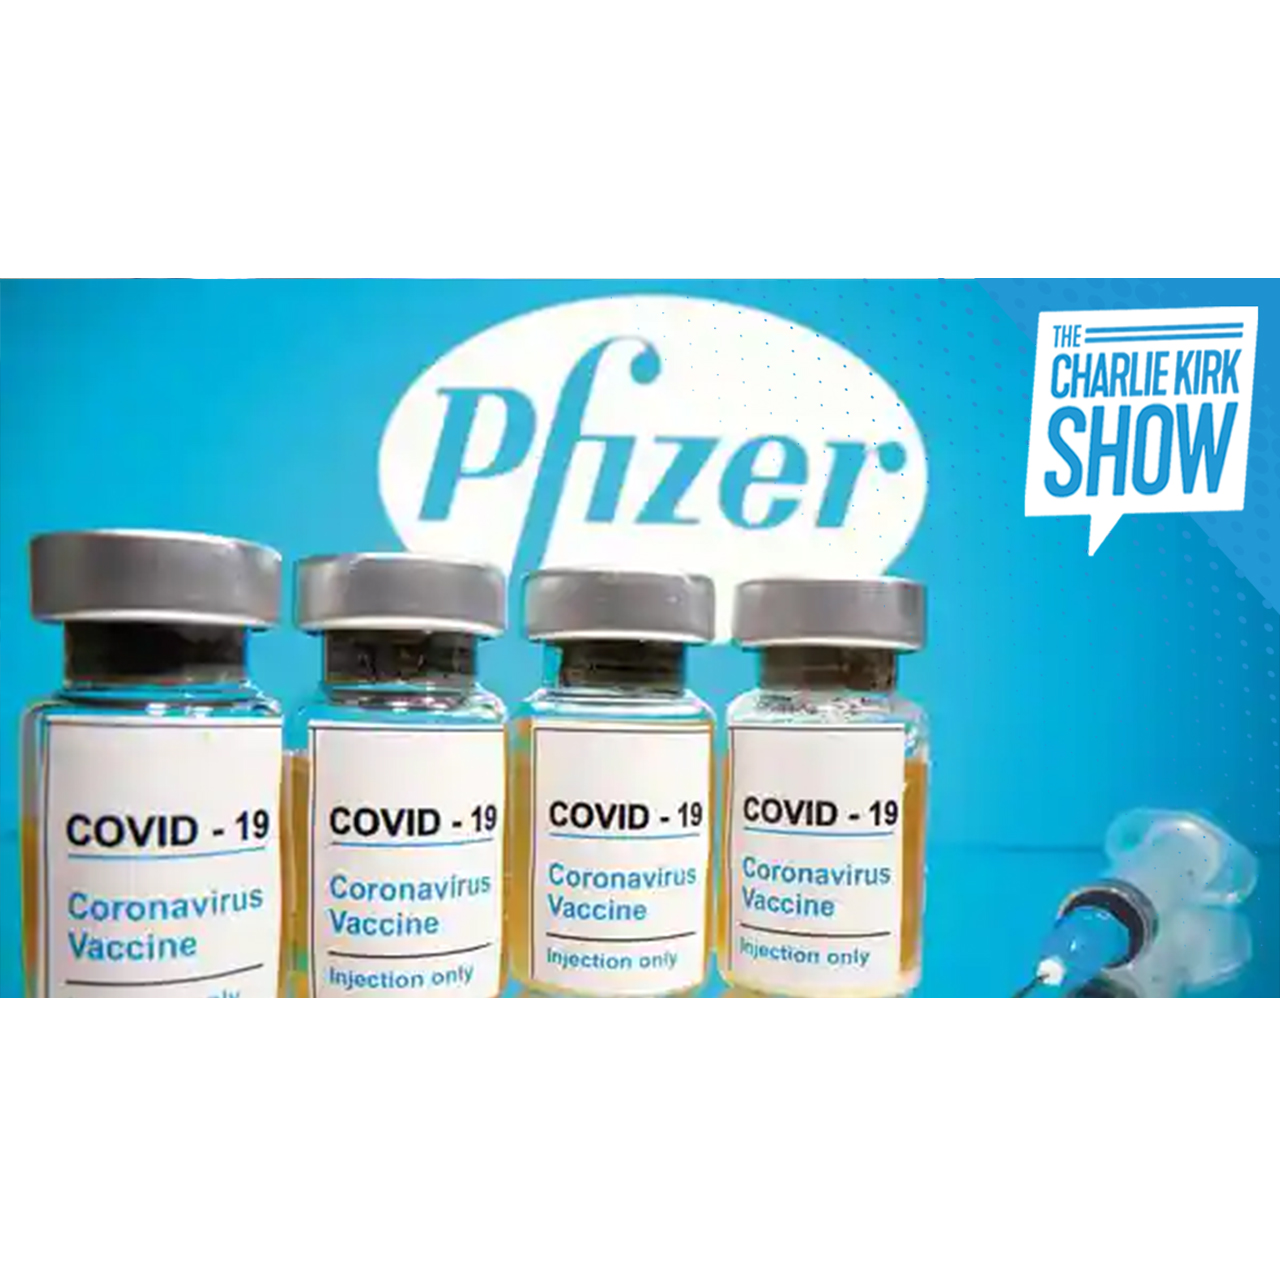 BOMBSHELL: A Pfizer Clinical Trial Whistleblower Speaks Out